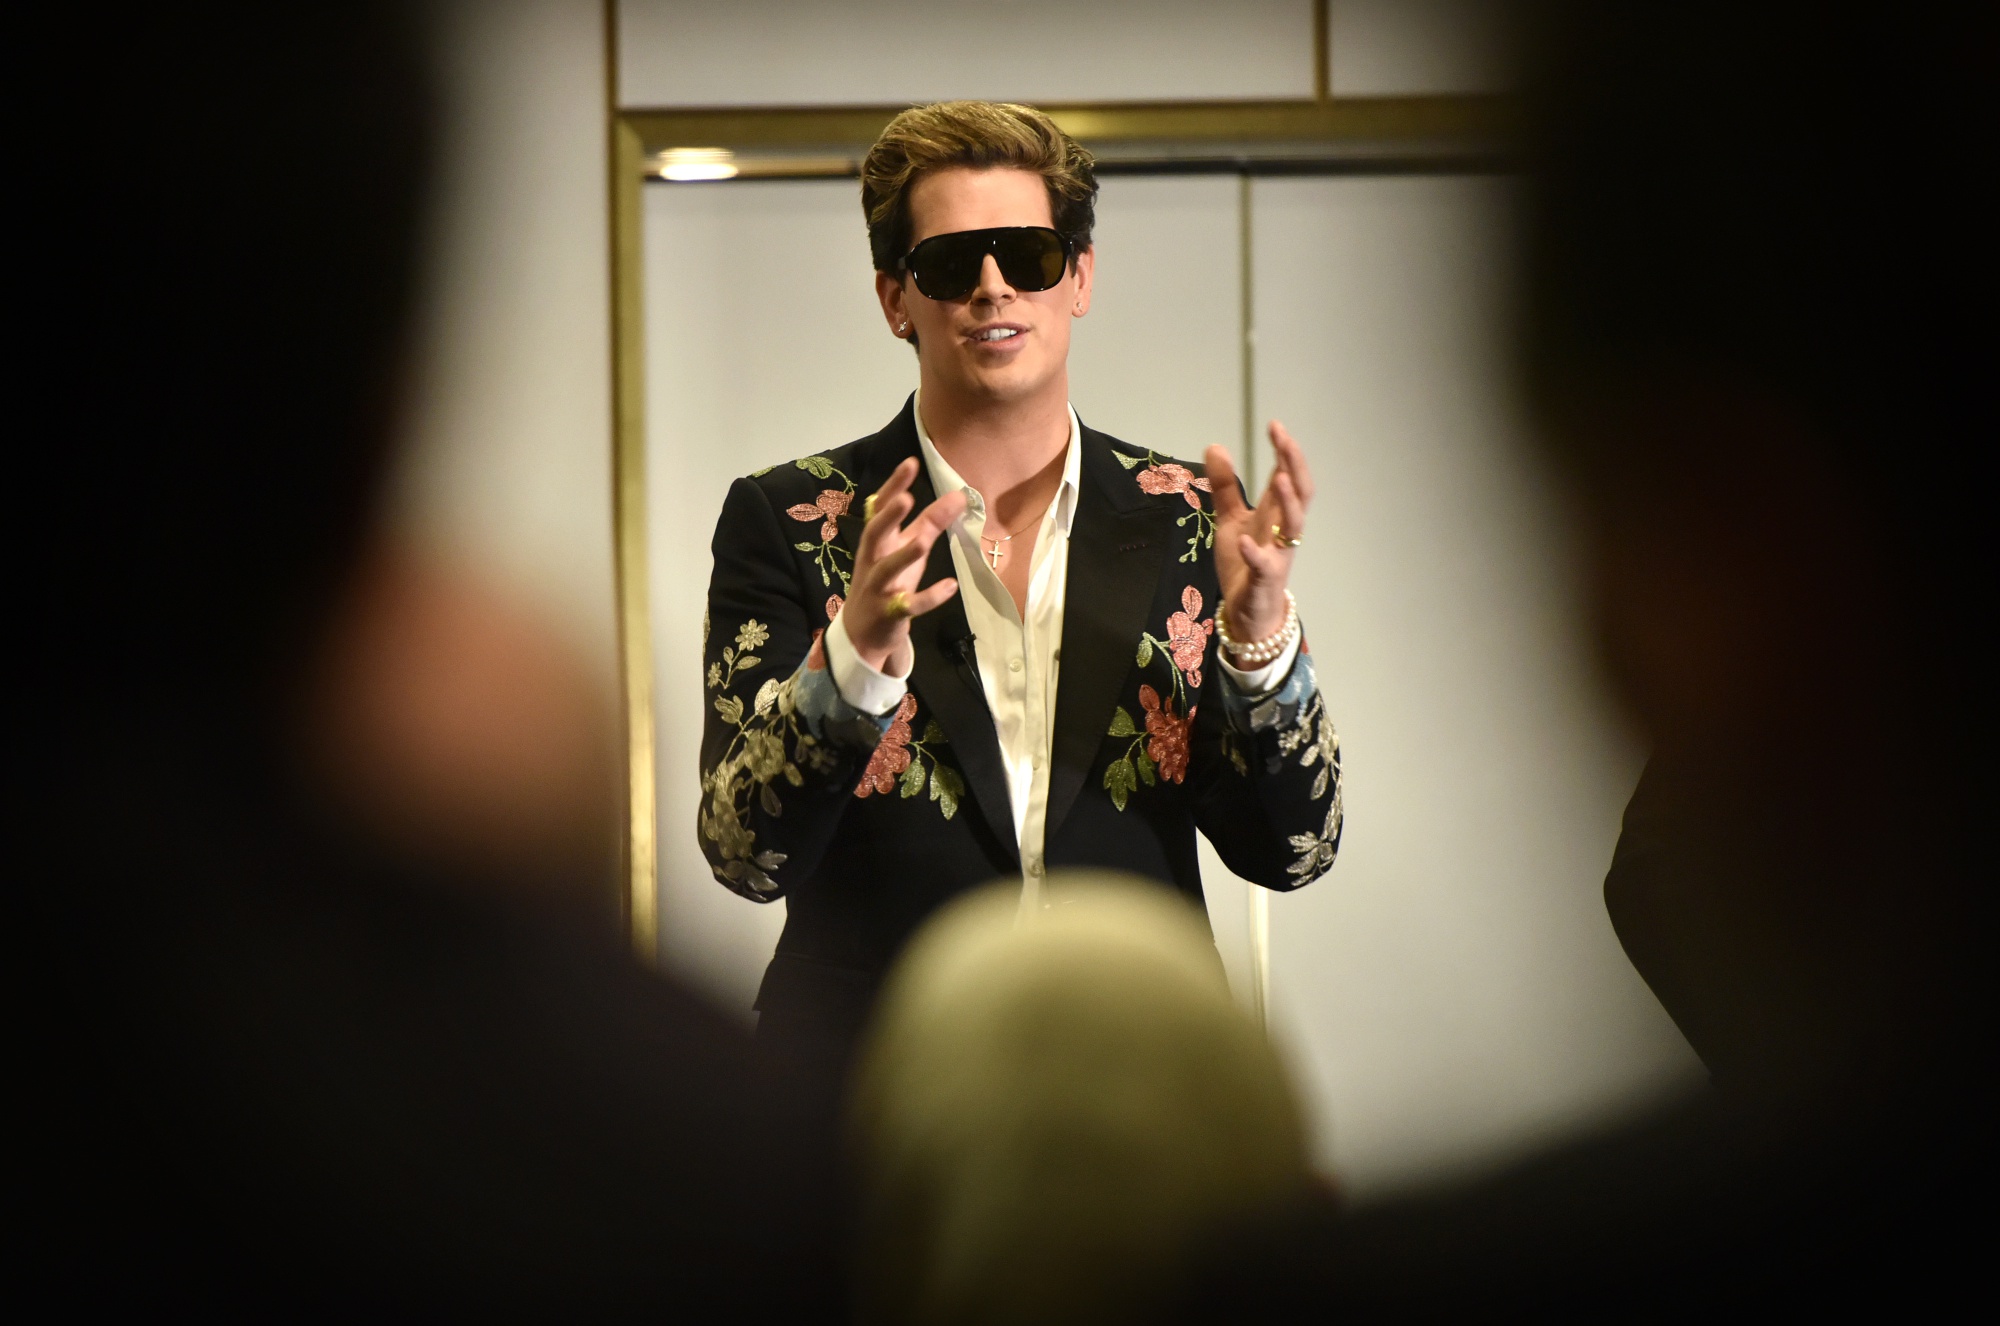 New Zealand Attack AltRight's Milo Yiannopoulos in Tour Ban Bloomberg